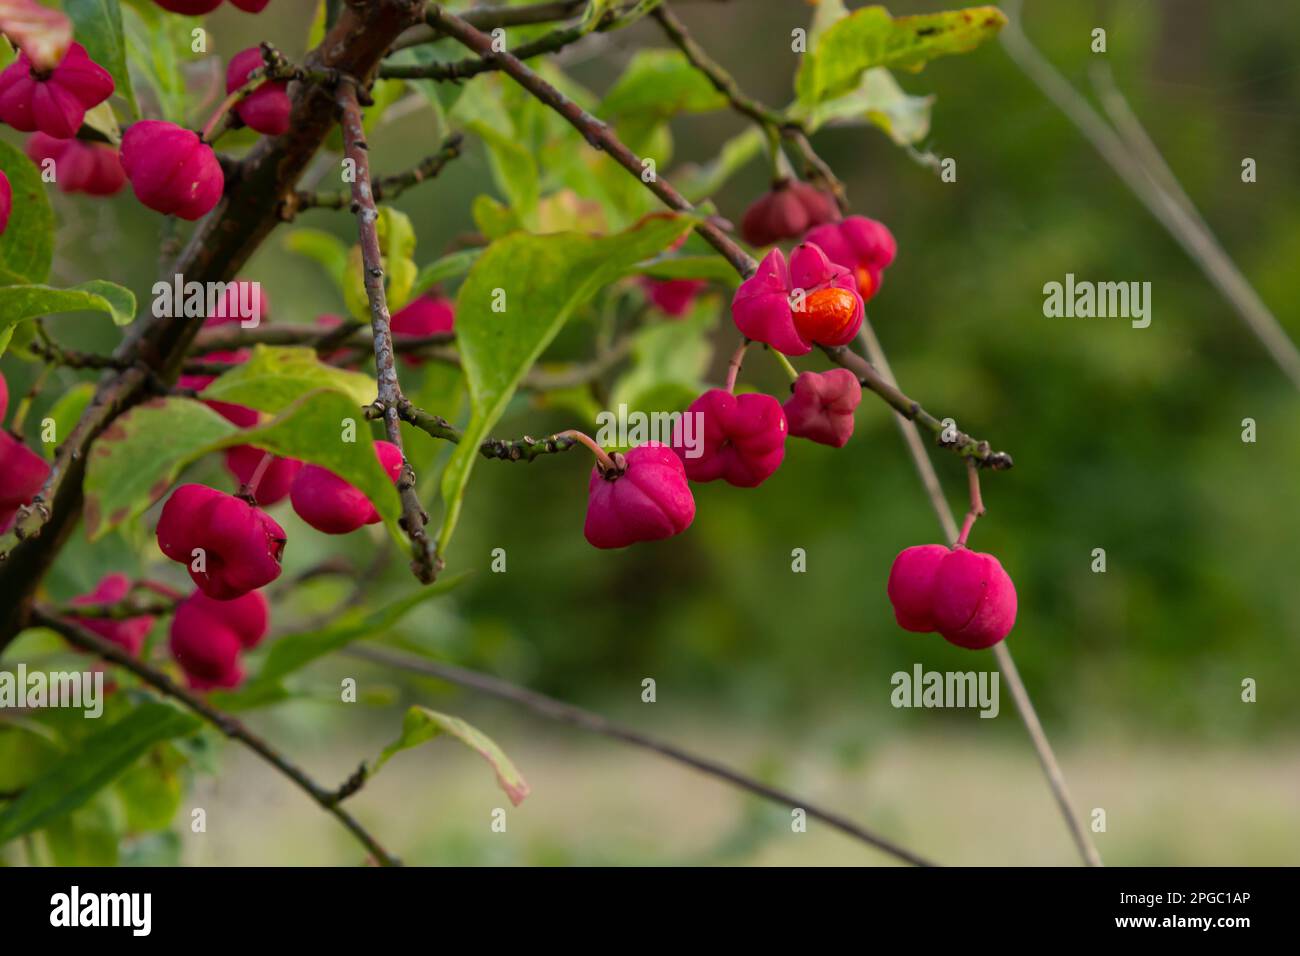 Euonymus europaeus, known as spindle, and also as European spindle and common spindle, is a deciduous shrub or small tree in the family Celastraceae. Stock Photo